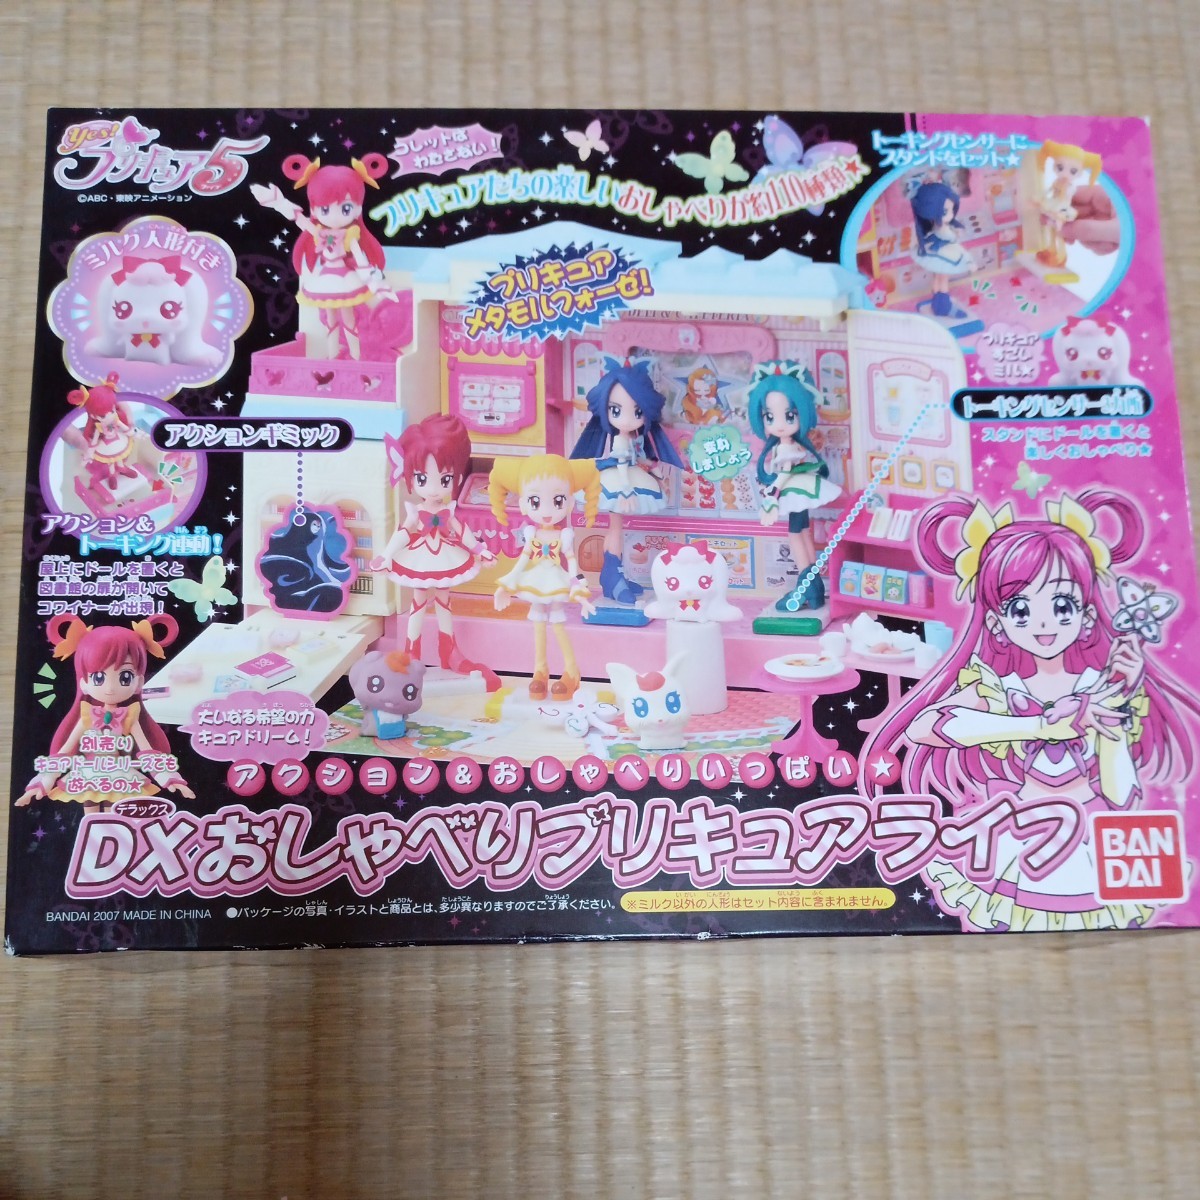  Bandai Deluxe ..... Precure life unopened yes Precure 5